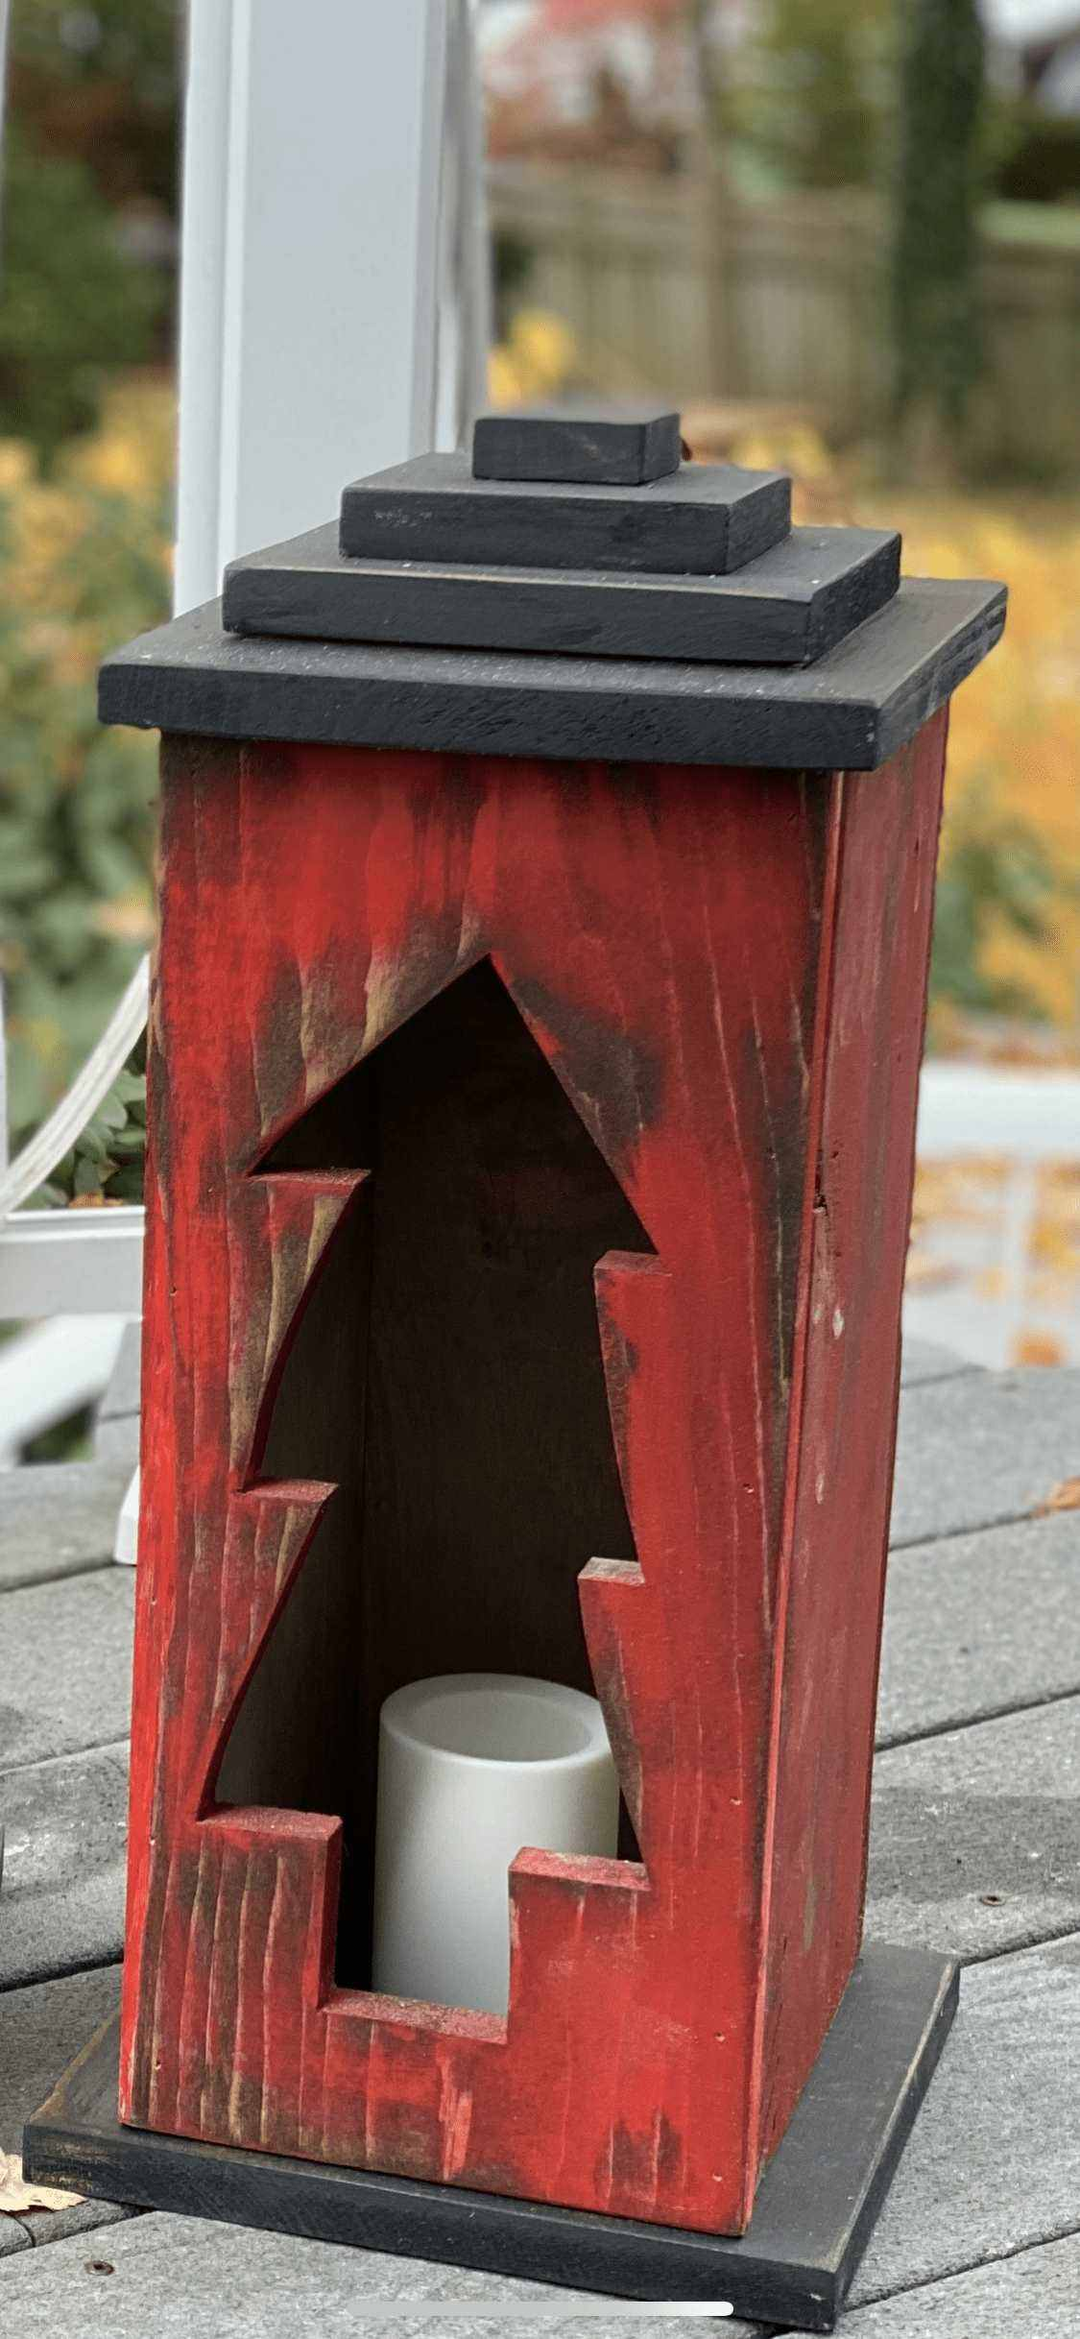 Atlantic Wood N Wares Home & Garden>Home Décor>Wall Decor>Wall Hangings medium / Antique Red & Black Elevate Your Space with Handcrafted Wooden Lanterns | Shop Now chris21